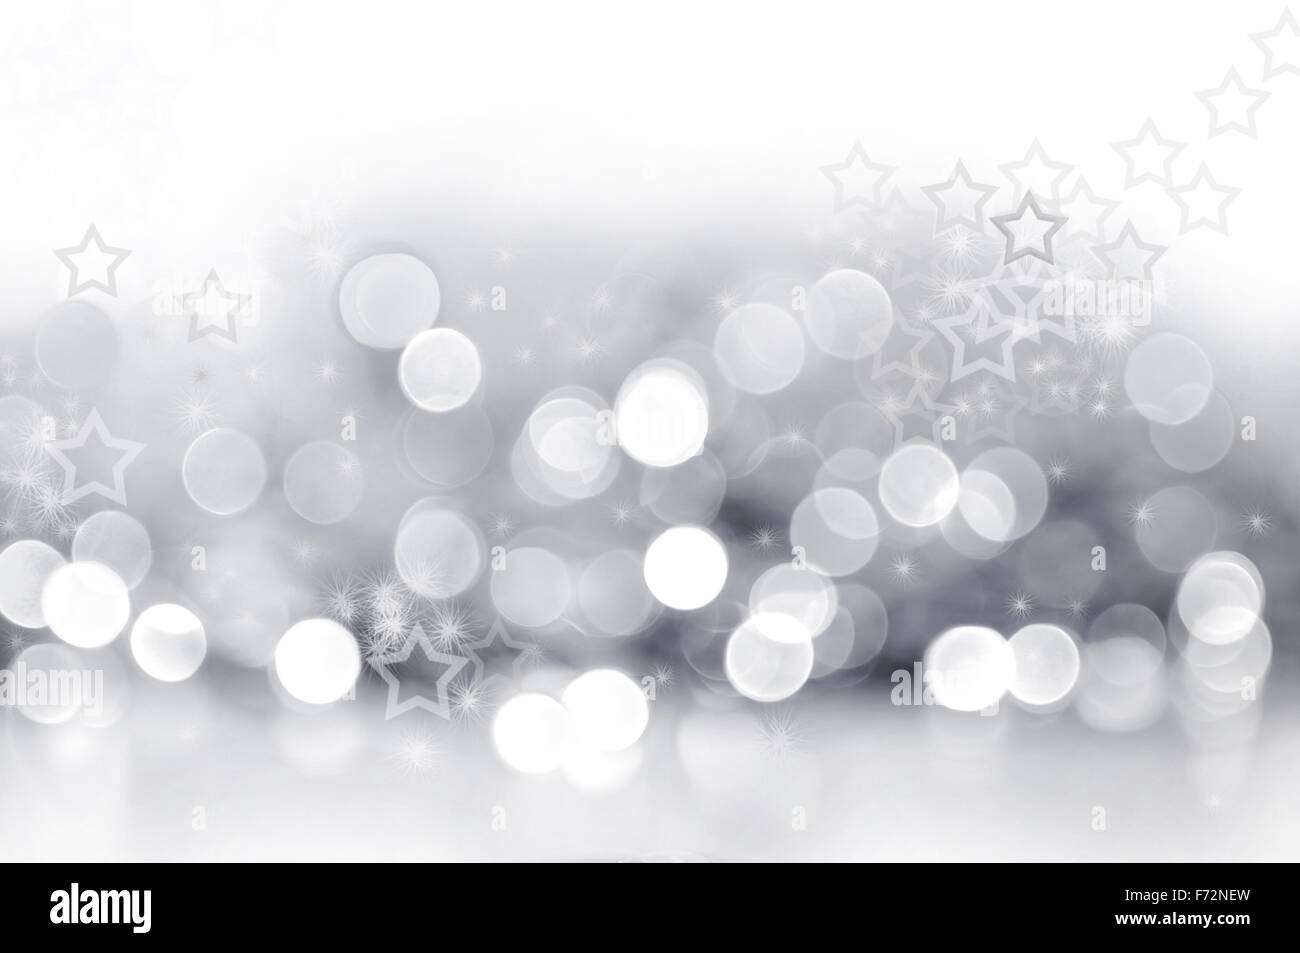 abstract light with stars white and black Stock Photo